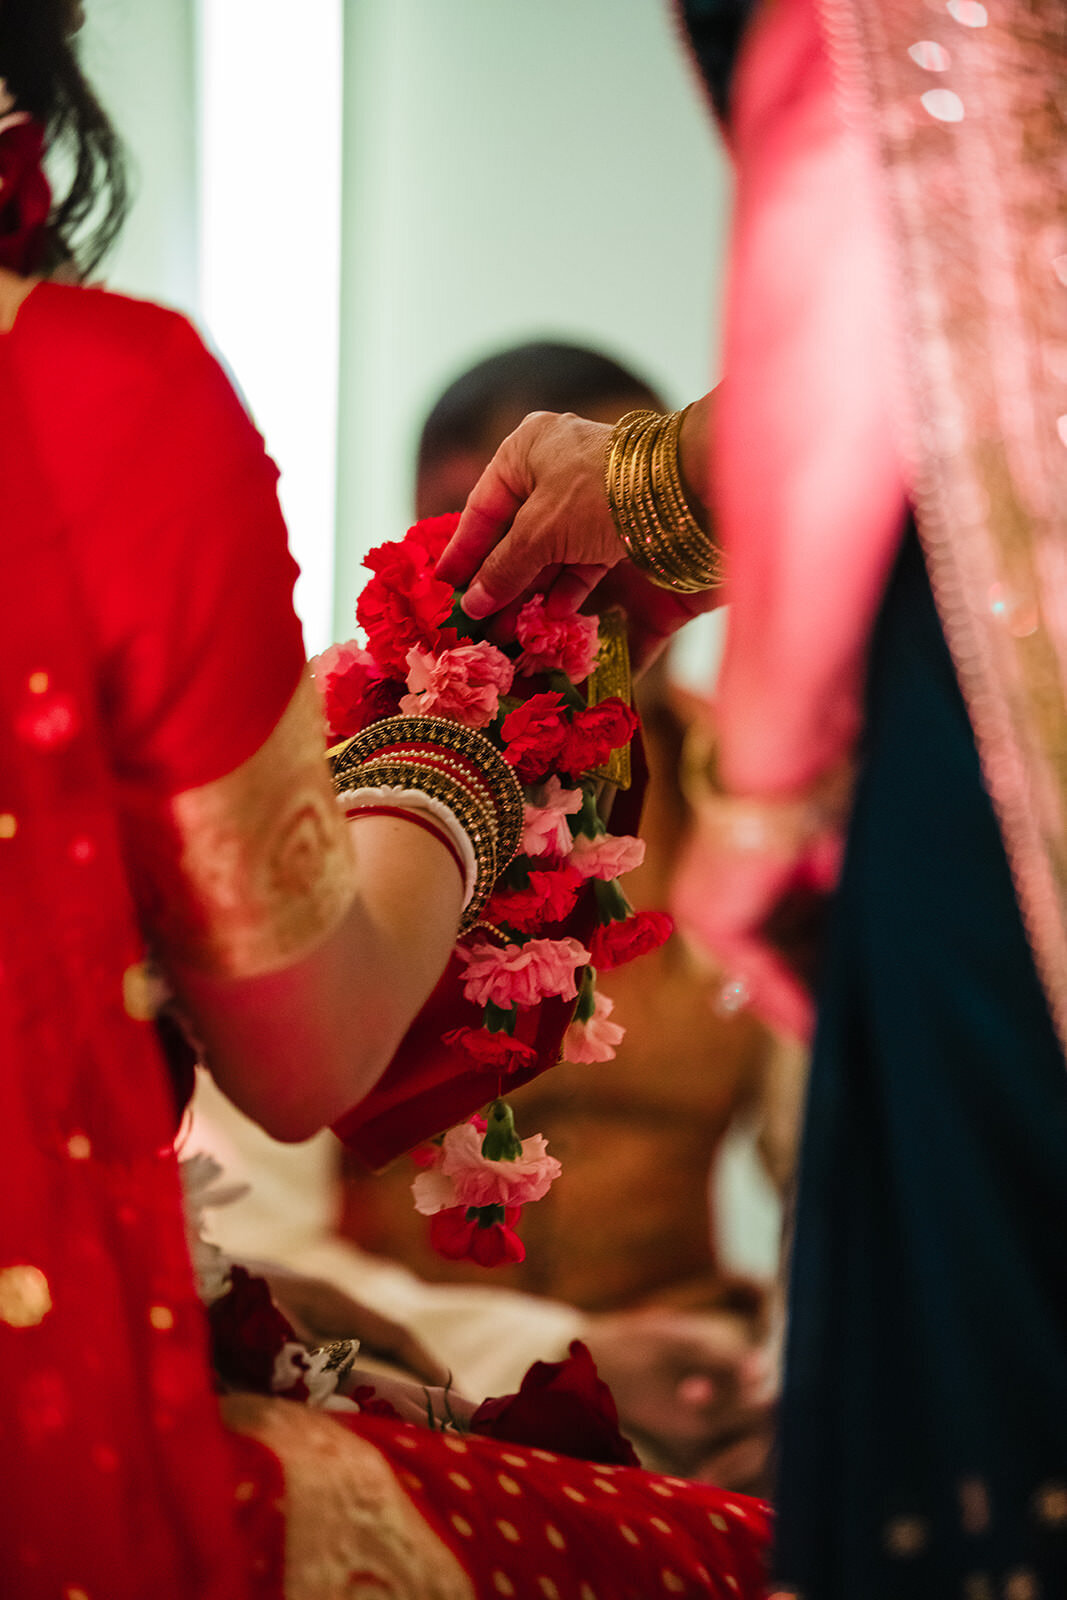 A close-up of a hand placing floral garlands on the wrist of a bride in red attire, with focus on the traditional Indian wedding bangles.